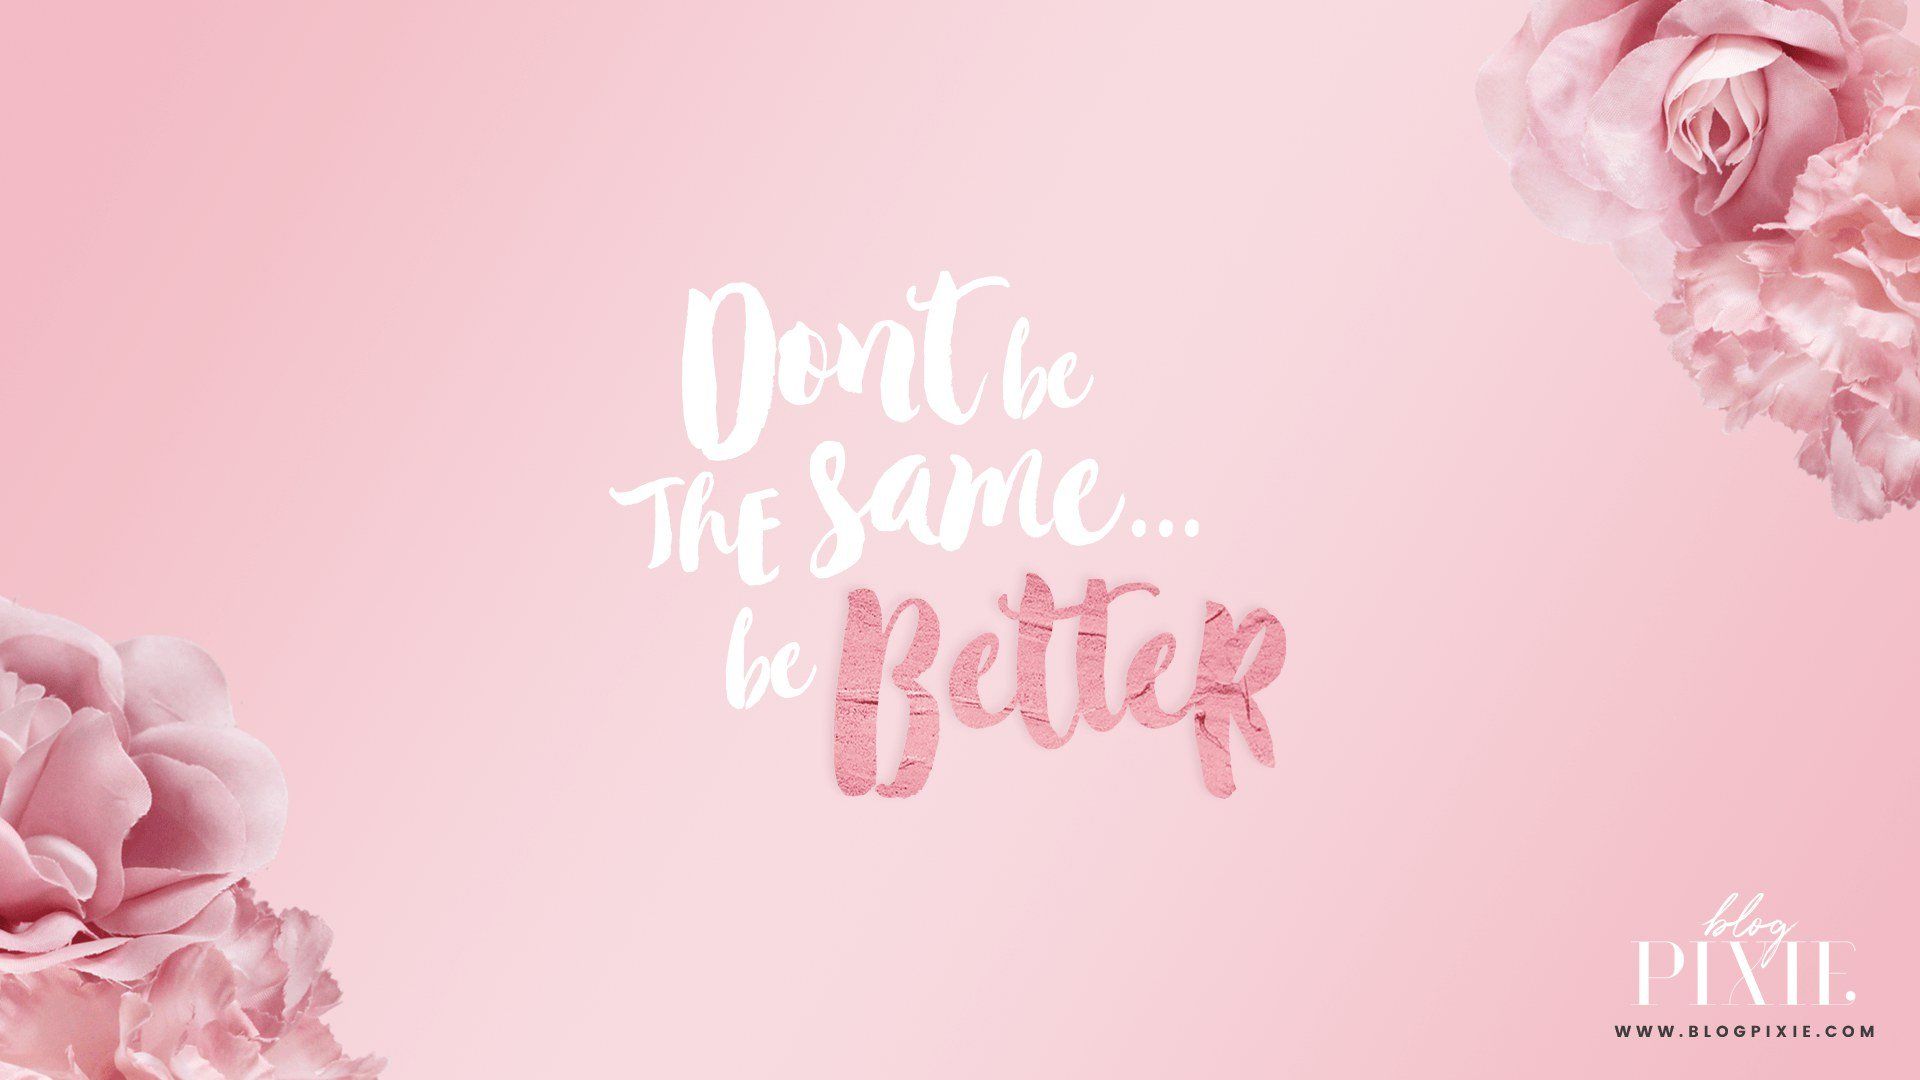 Don't Be The Same. Be Better Wallpaper, Rose Gold